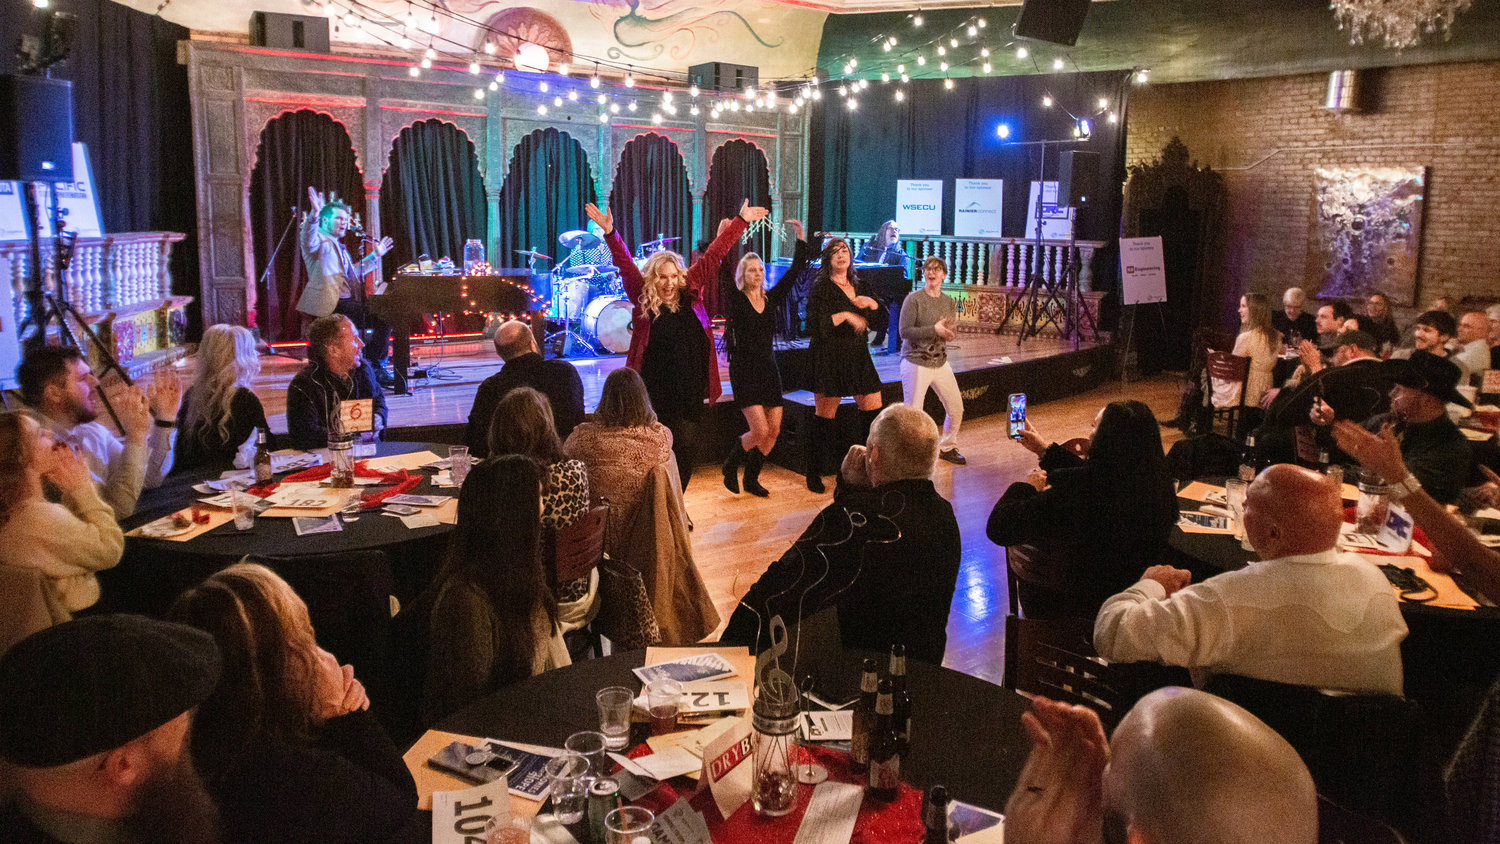 Attendees dance to dueling pianos during a Harmonies for Hope event raising money for the Boys and Girls Club of Lewis County Saturday night.